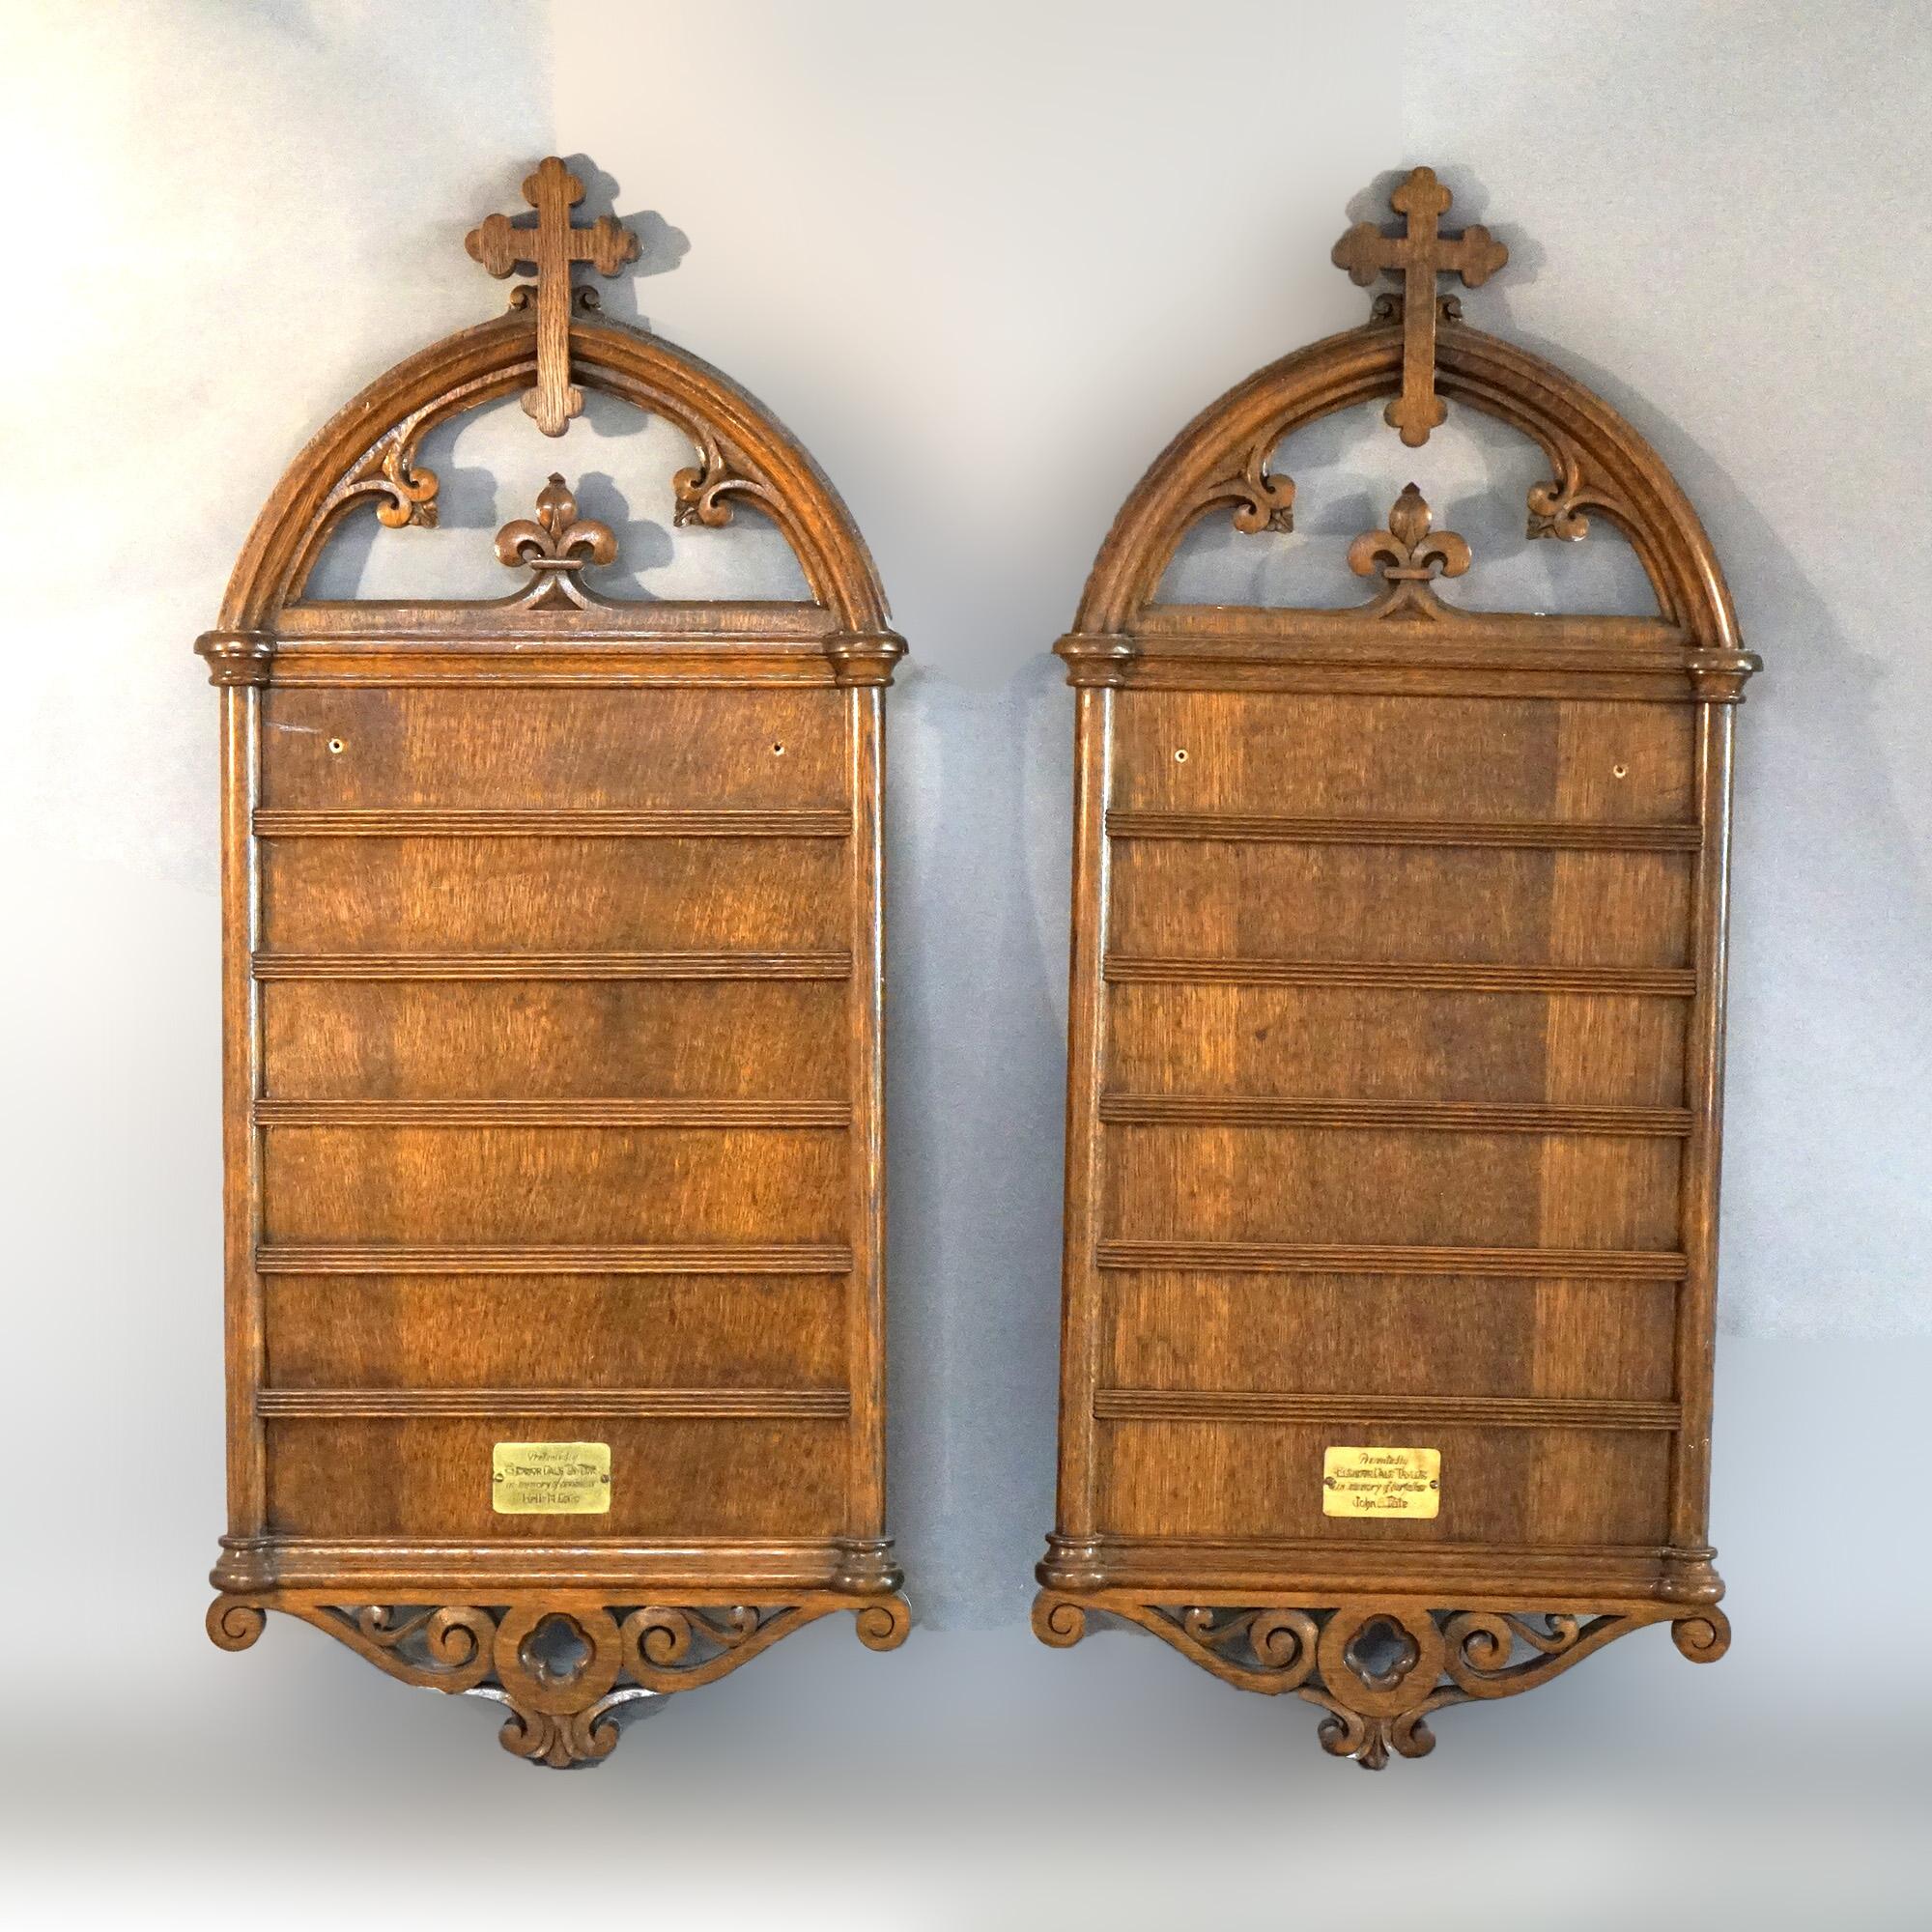 Antique Pair of Gothic Revival Carved Quarter Sawn Oak Hymnal Boards 19thC

Measures - 114